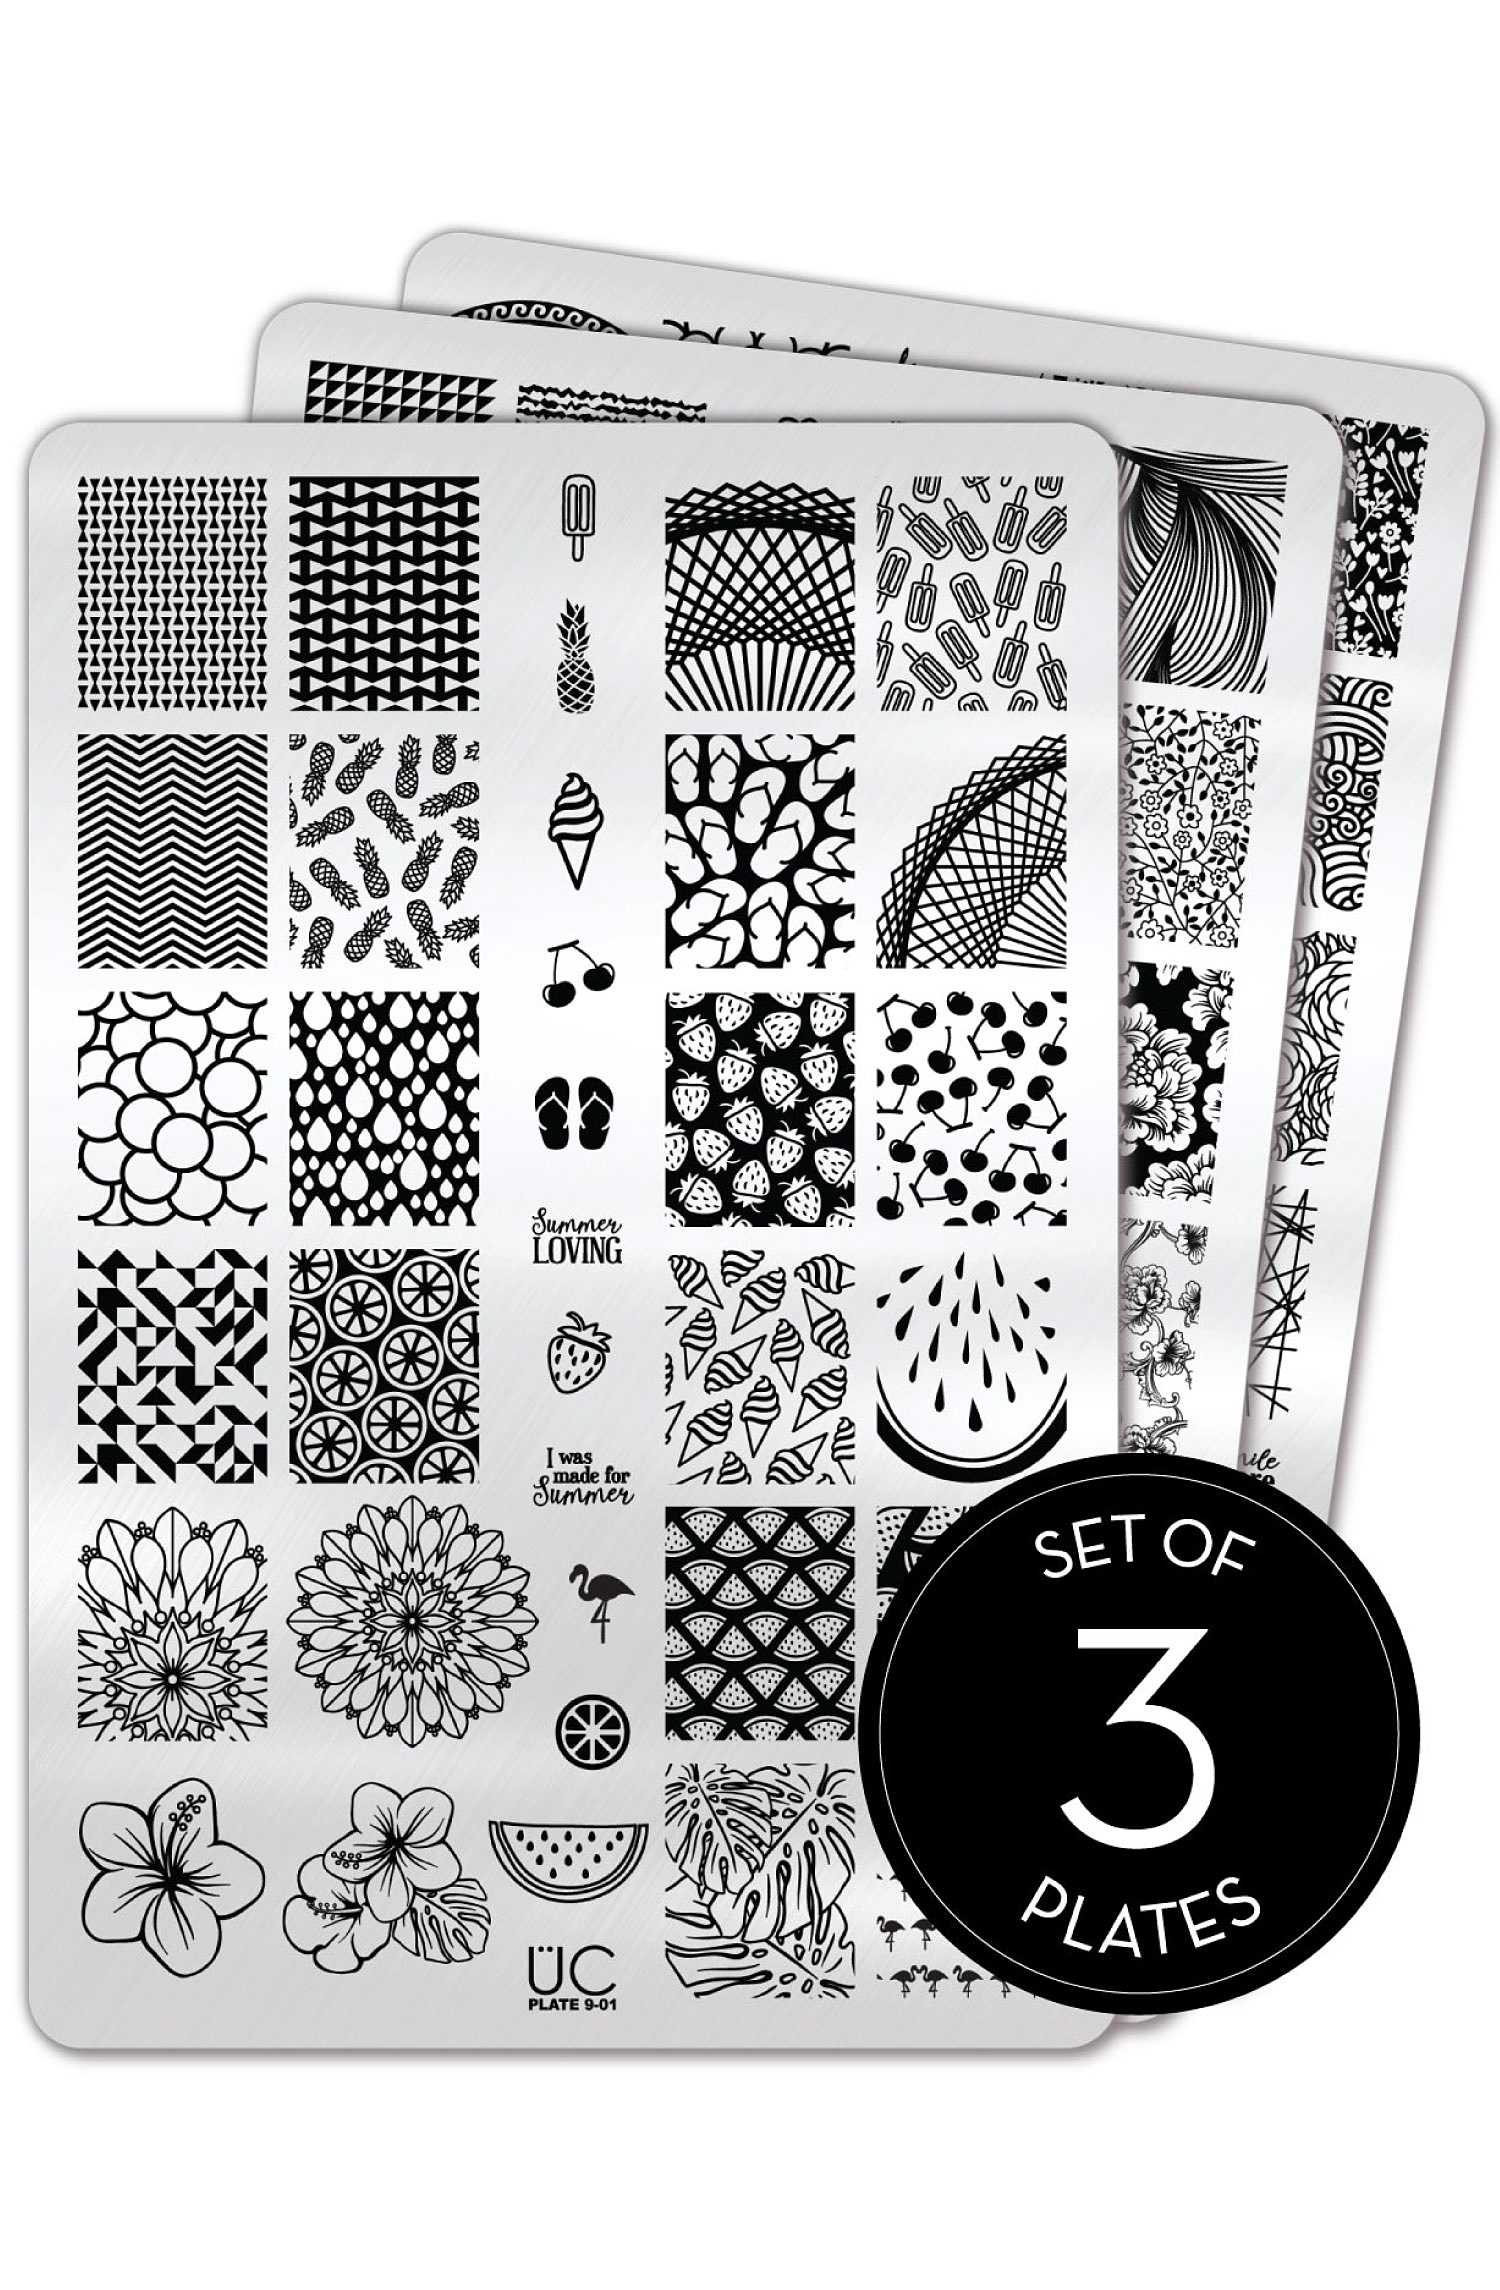 Nail Art Template Mix Designs Stamping Image Plates For Manicure Nail Salon  - Walmart.com